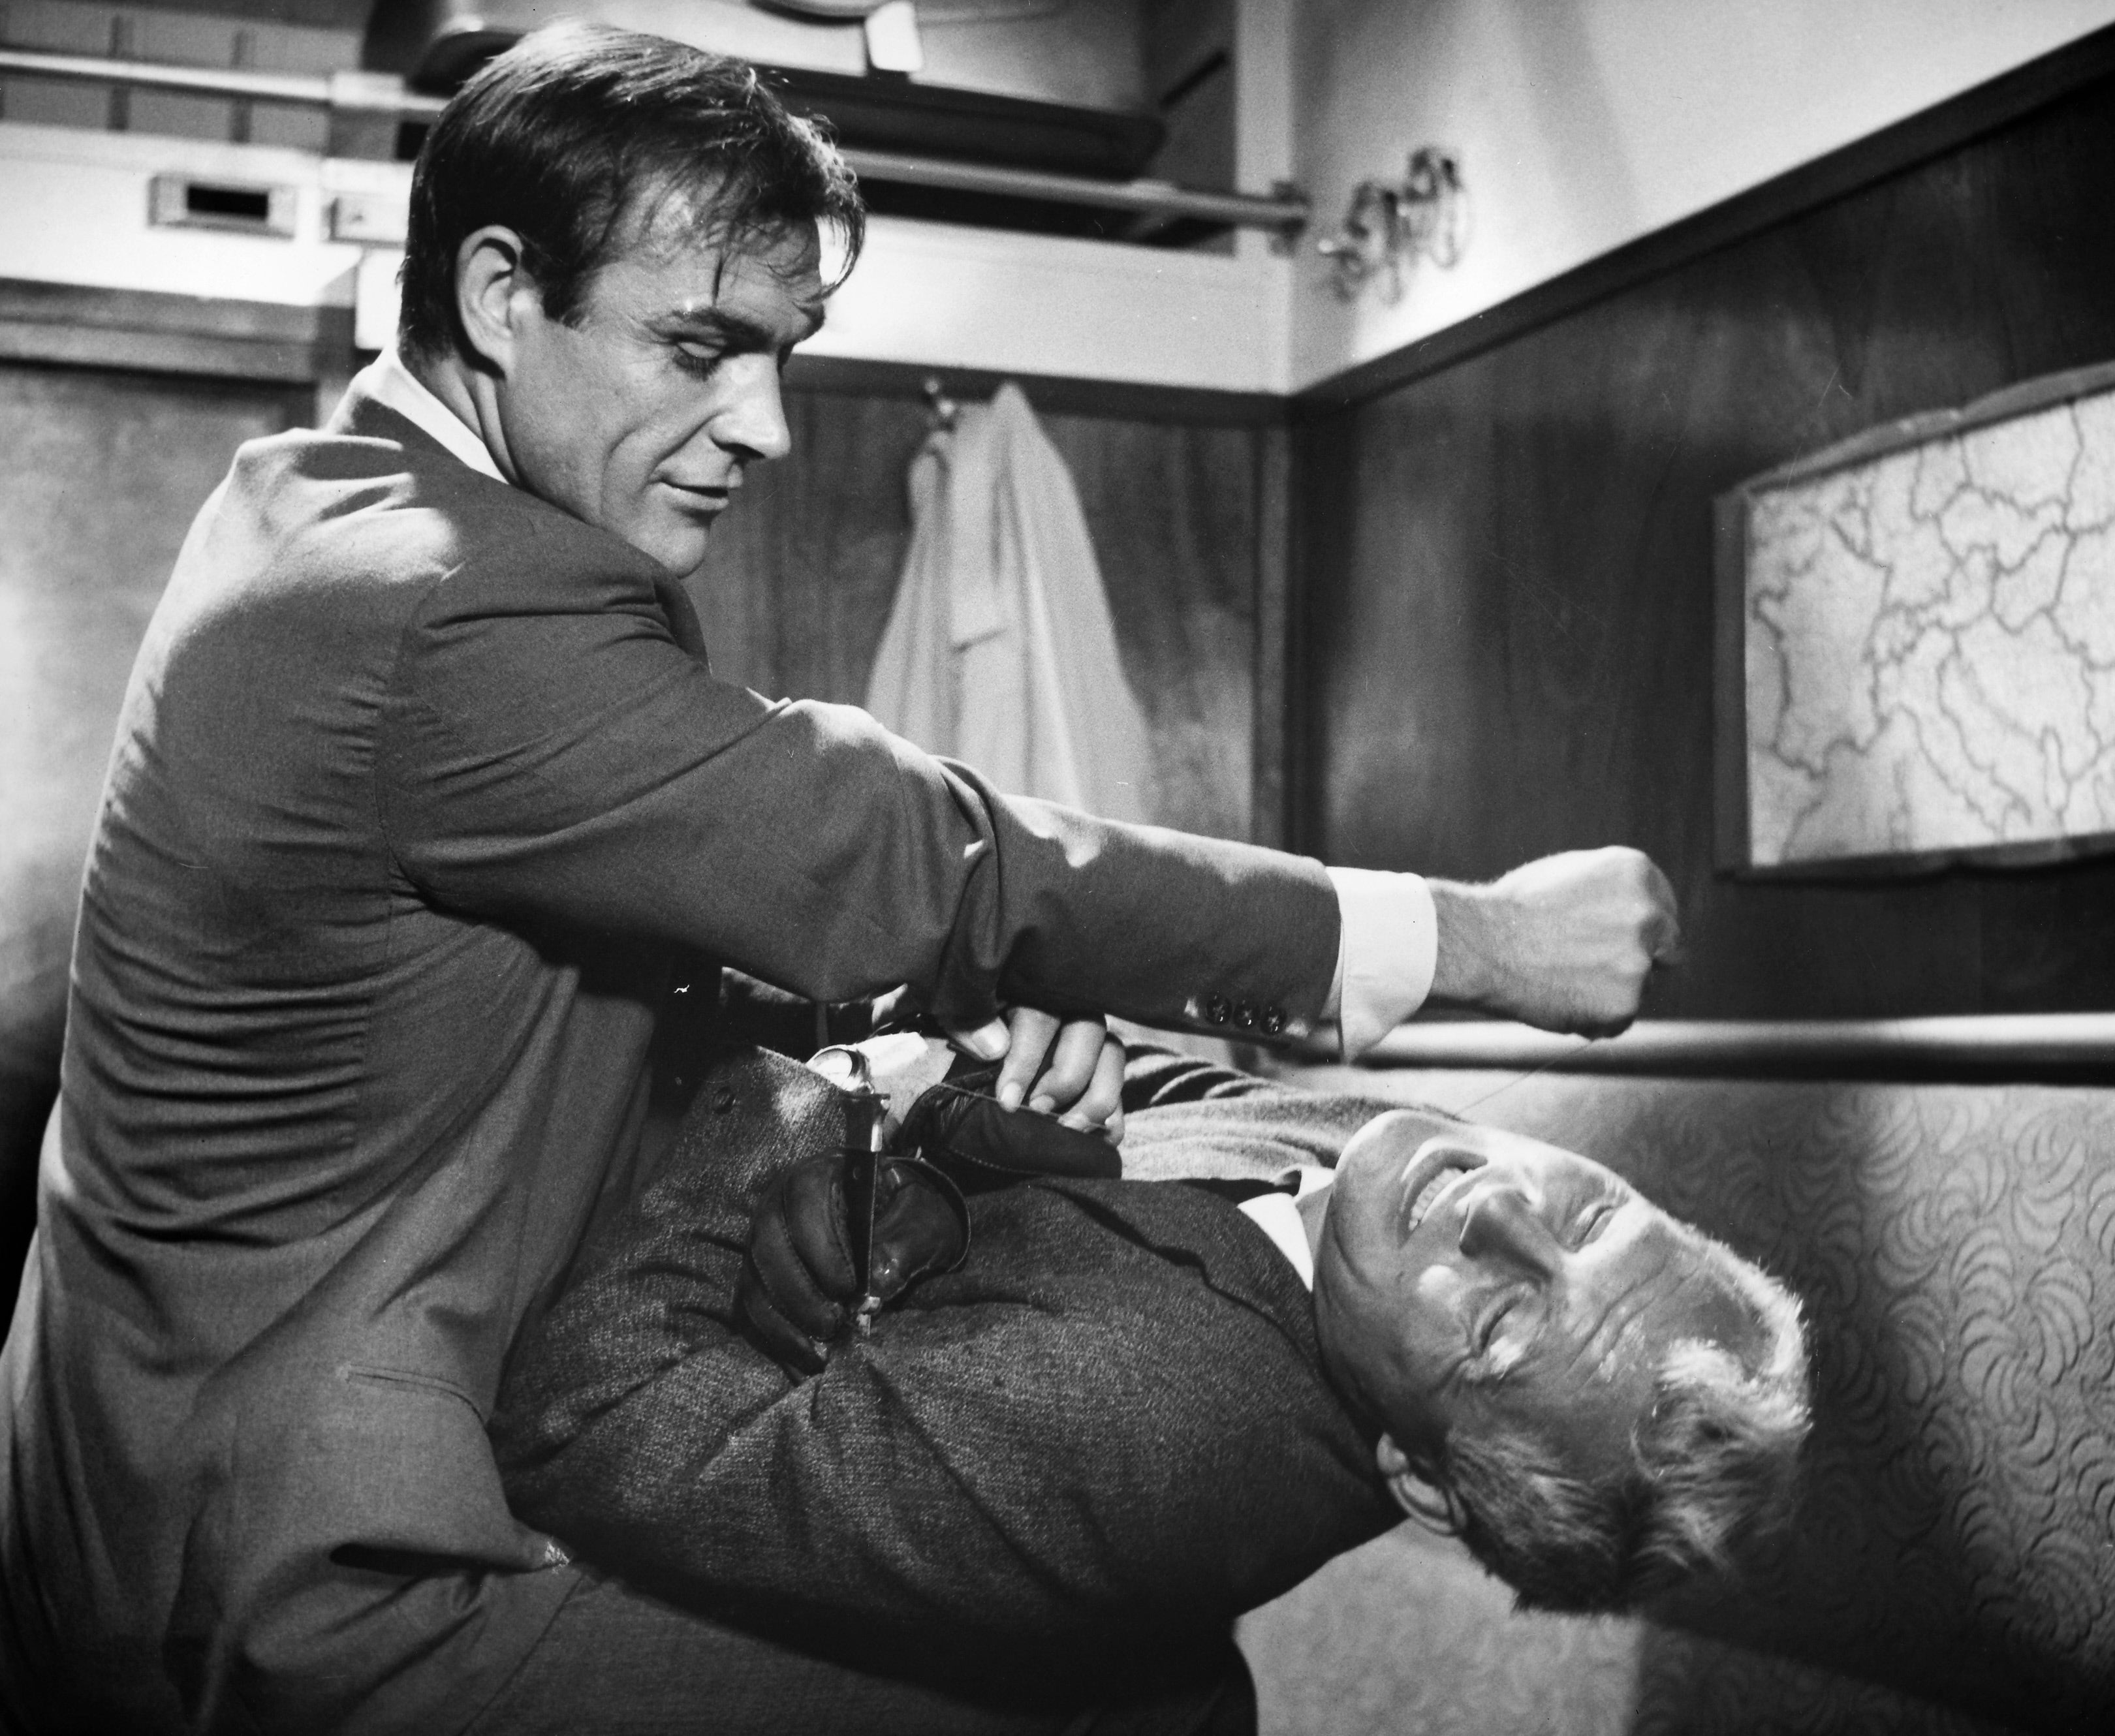 Robert Shaw as Donald ‘Red’ Grant and Sean Connery as James Bond in ‘From Russia with Love’ in 1963